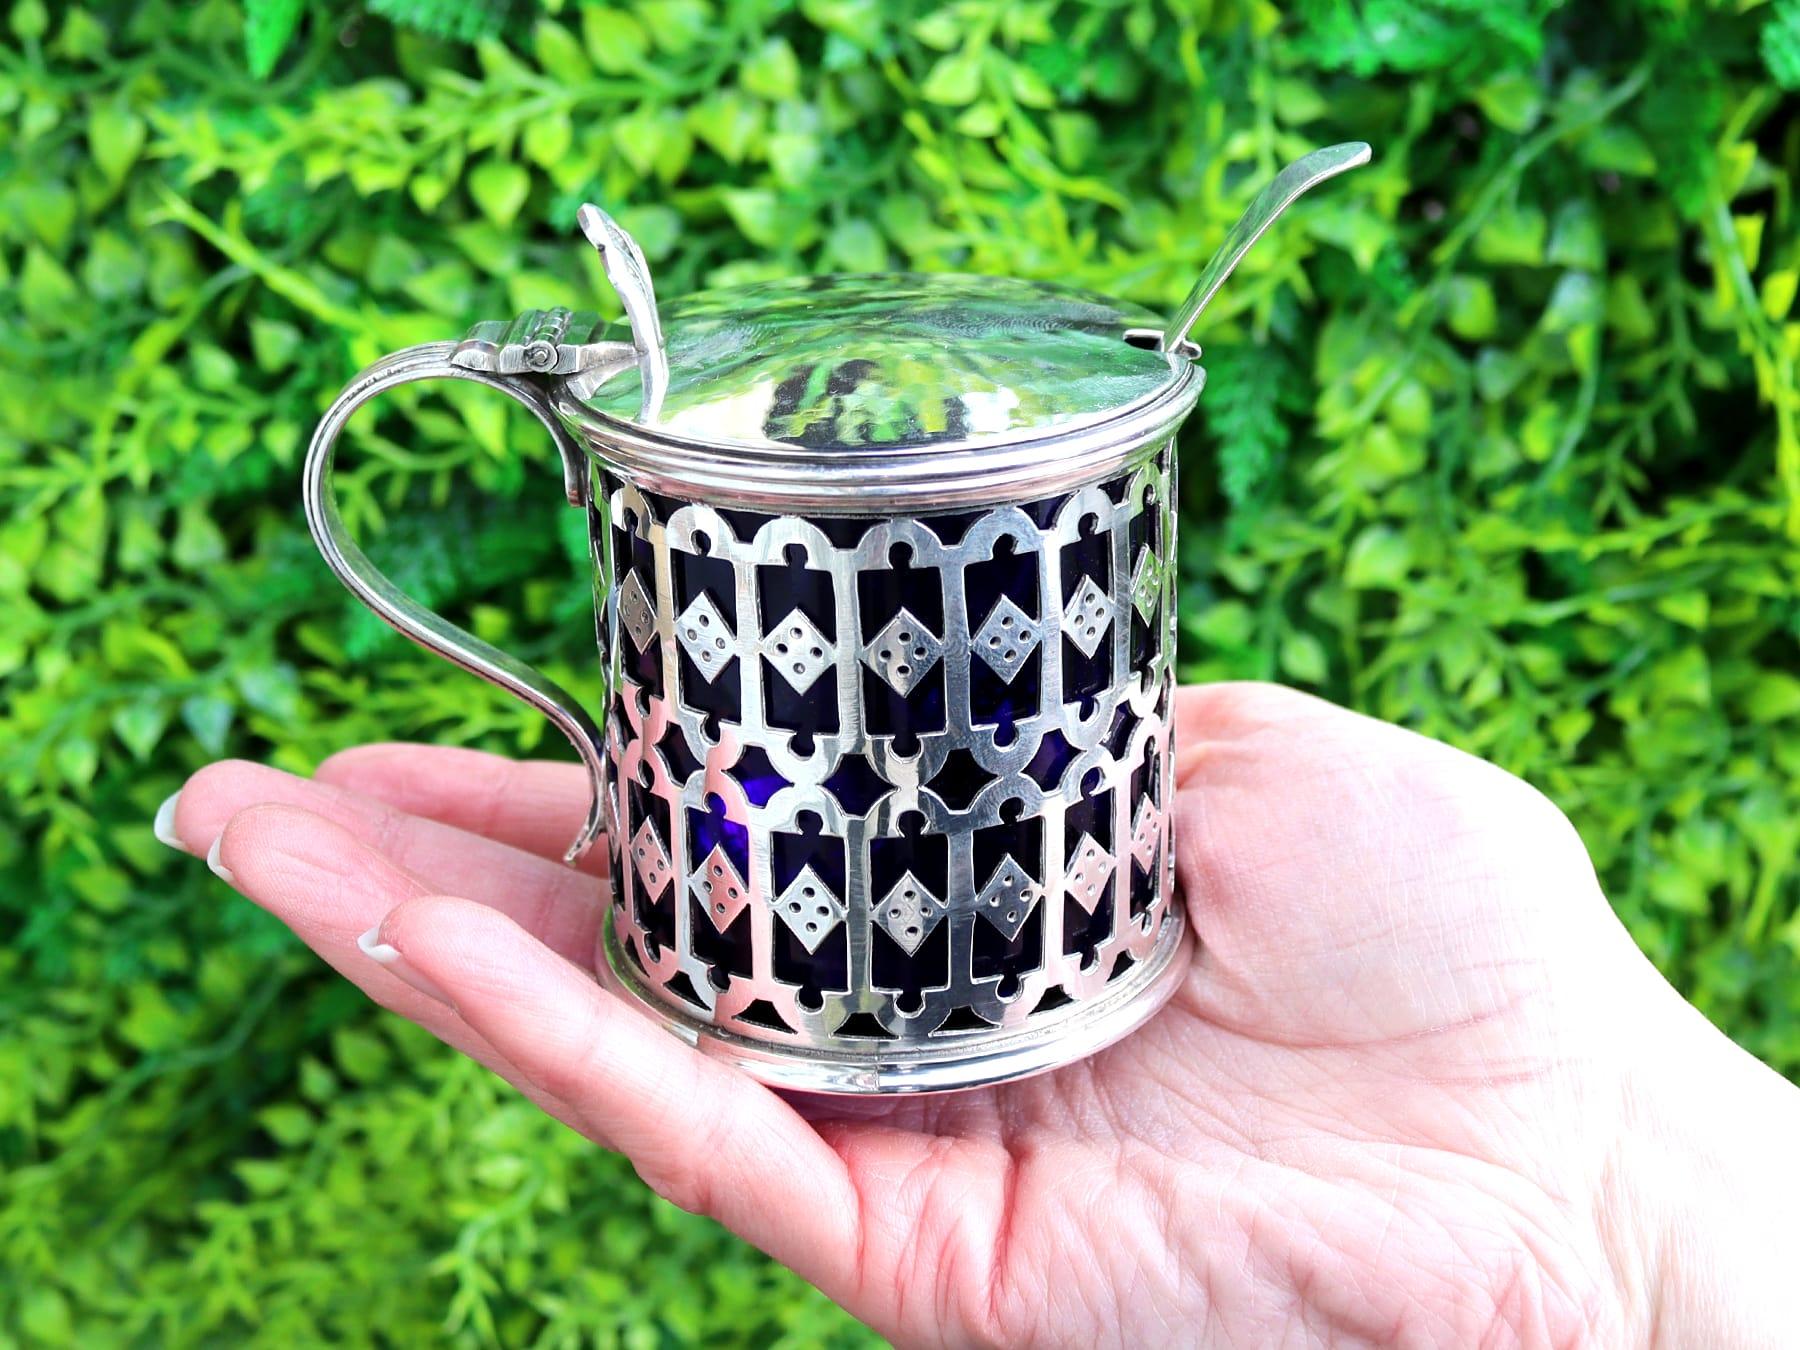 An exceptional, fine and impressive rare antique English sterling silver mustard pot with blue glass liner made by Omar Ramsden; an addition to our silver cruets/condiments collection.

This exceptional and rare antique sterling silver mustard pot